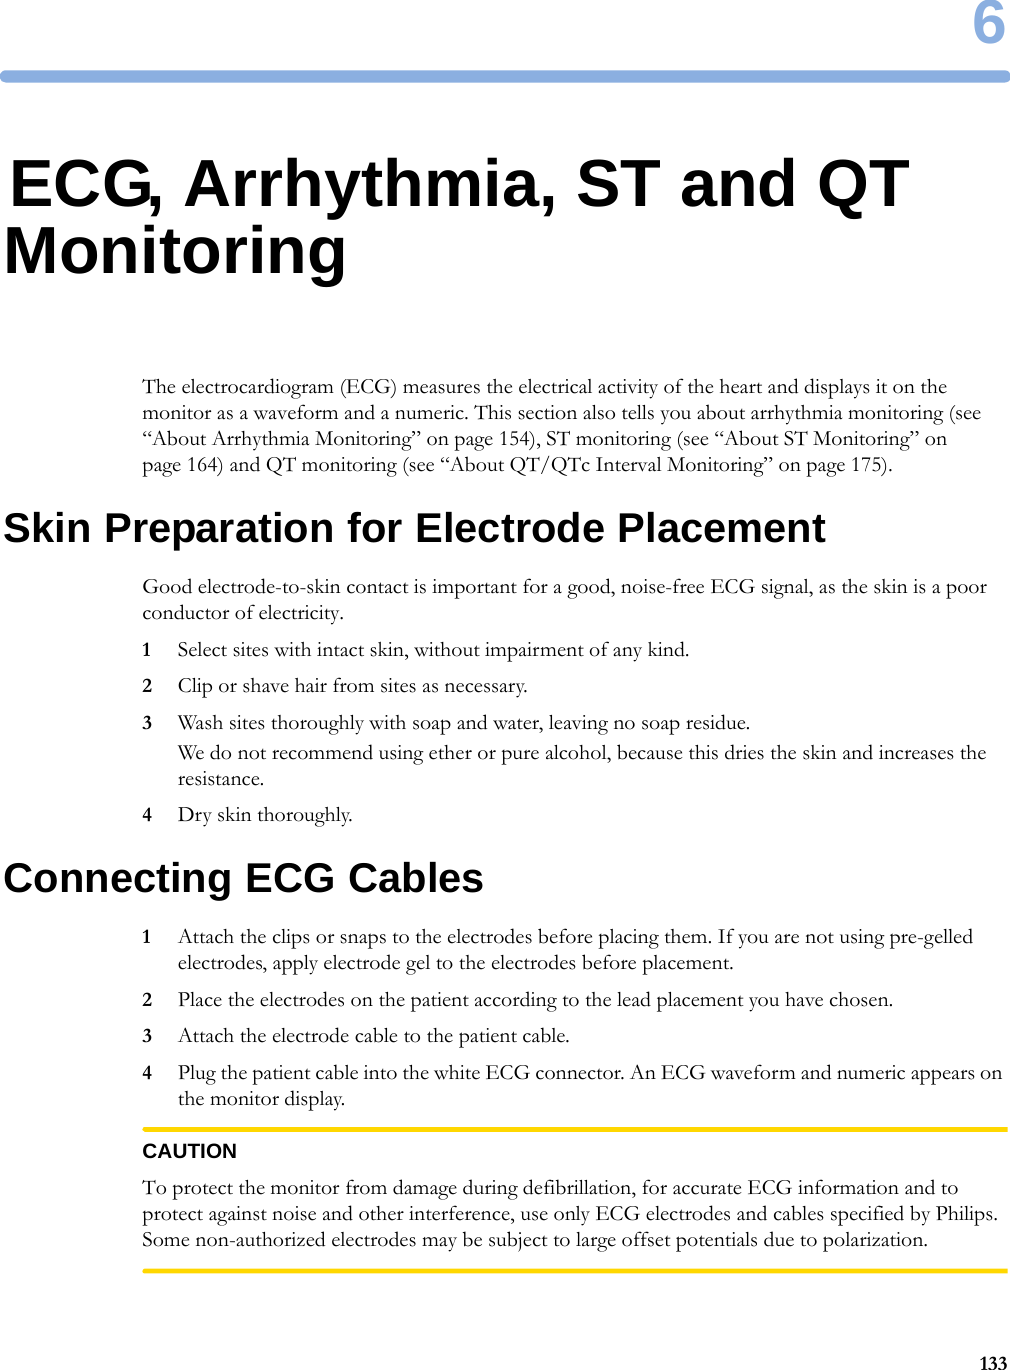 61336ECG, Arrhythmia, ST and QT MonitoringThe electrocardiogram (ECG) measures the electrical activity of the heart and displays it on the monitor as a waveform and a numeric. This section also tells you about arrhythmia monitoring (see “About Arrhythmia Monitoring” on page 154), ST monitoring (see “About ST Monitoring” on page 164) and QT monitoring (see “About QT/QTc Interval Monitoring” on page 175).Skin Preparation for Electrode PlacementGood electrode-to-skin contact is important for a good, noise-free ECG signal, as the skin is a poor conductor of electricity.1Select sites with intact skin, without impairment of any kind.2Clip or shave hair from sites as necessary.3Wash sites thoroughly with soap and water, leaving no soap residue.We do not recommend using ether or pure alcohol, because this dries the skin and increases the resistance.4Dry skin thoroughly.Connecting ECG Cables1Attach the clips or snaps to the electrodes before placing them. If you are not using pre-gelled electrodes, apply electrode gel to the electrodes before placement.2Place the electrodes on the patient according to the lead placement you have chosen.3Attach the electrode cable to the patient cable.4Plug the patient cable into the white ECG connector. An ECG waveform and numeric appears on the monitor display.CAUTIONTo protect the monitor from damage during defibrillation, for accurate ECG information and to protect against noise and other interference, use only ECG electrodes and cables specified by Philips. Some non-authorized electrodes may be subject to large offset potentials due to polarization.